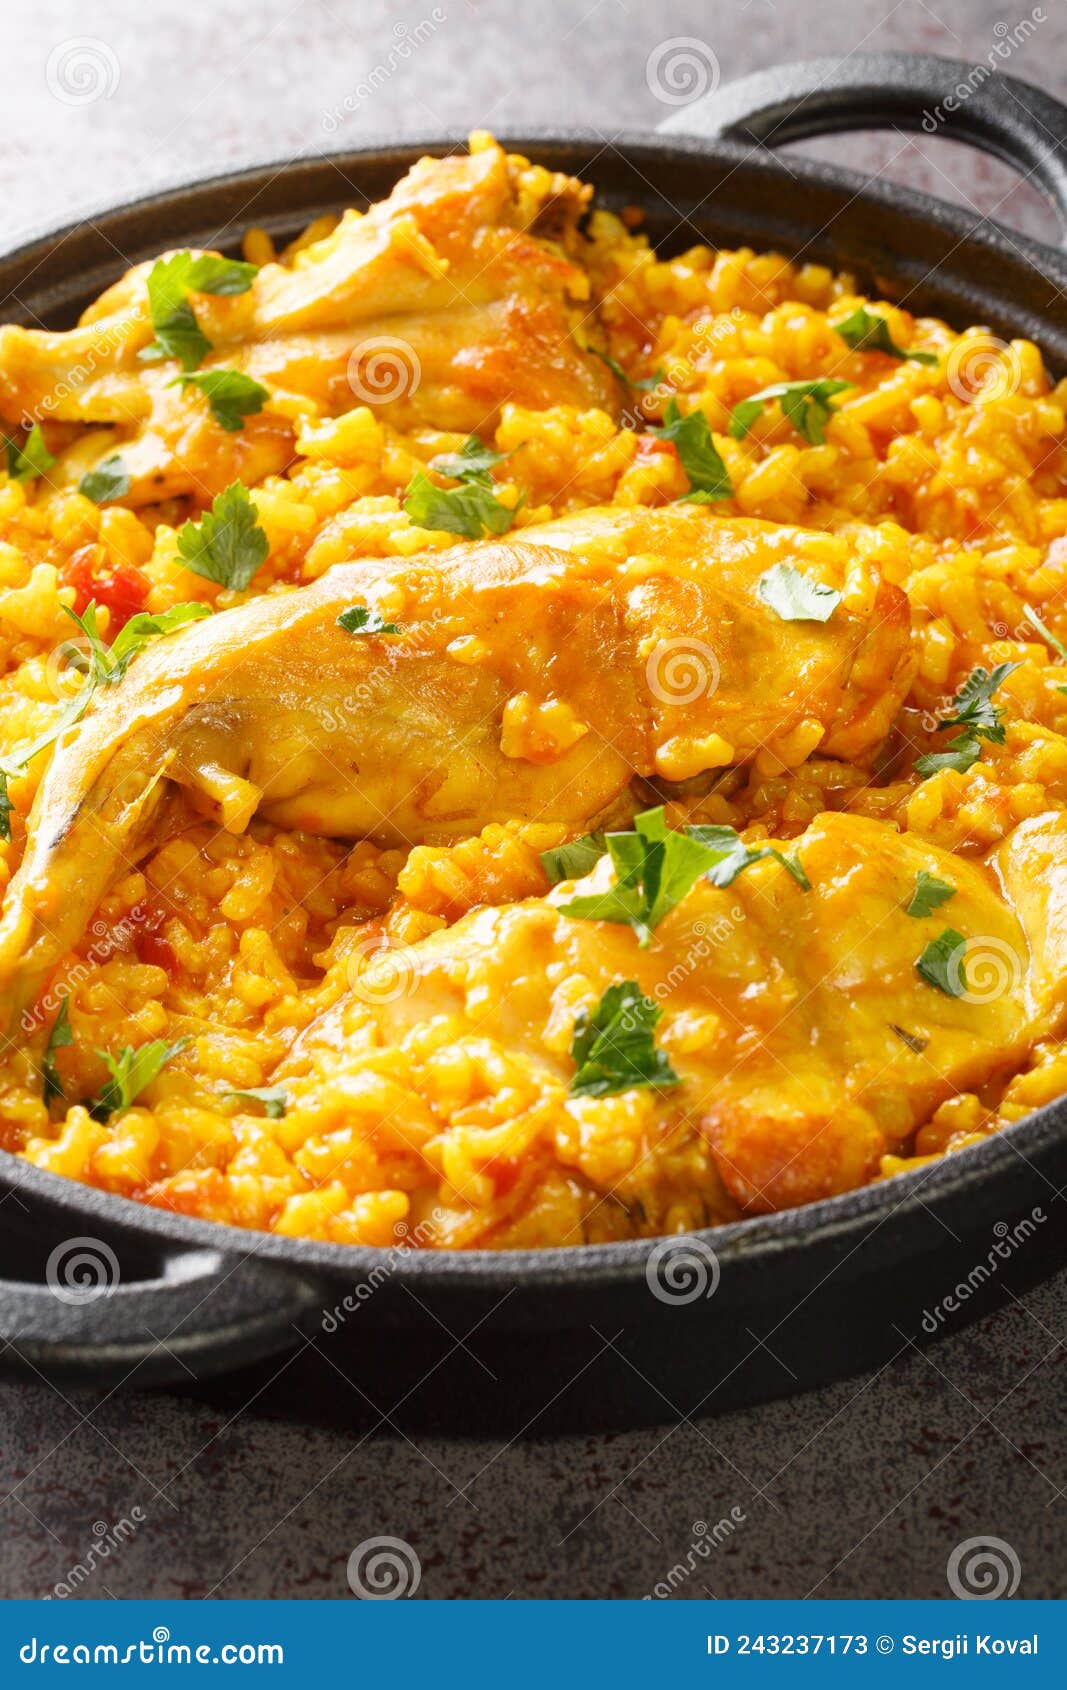 typical spanish rice with rabbit arroz con conejo closeup in the pan. vertical